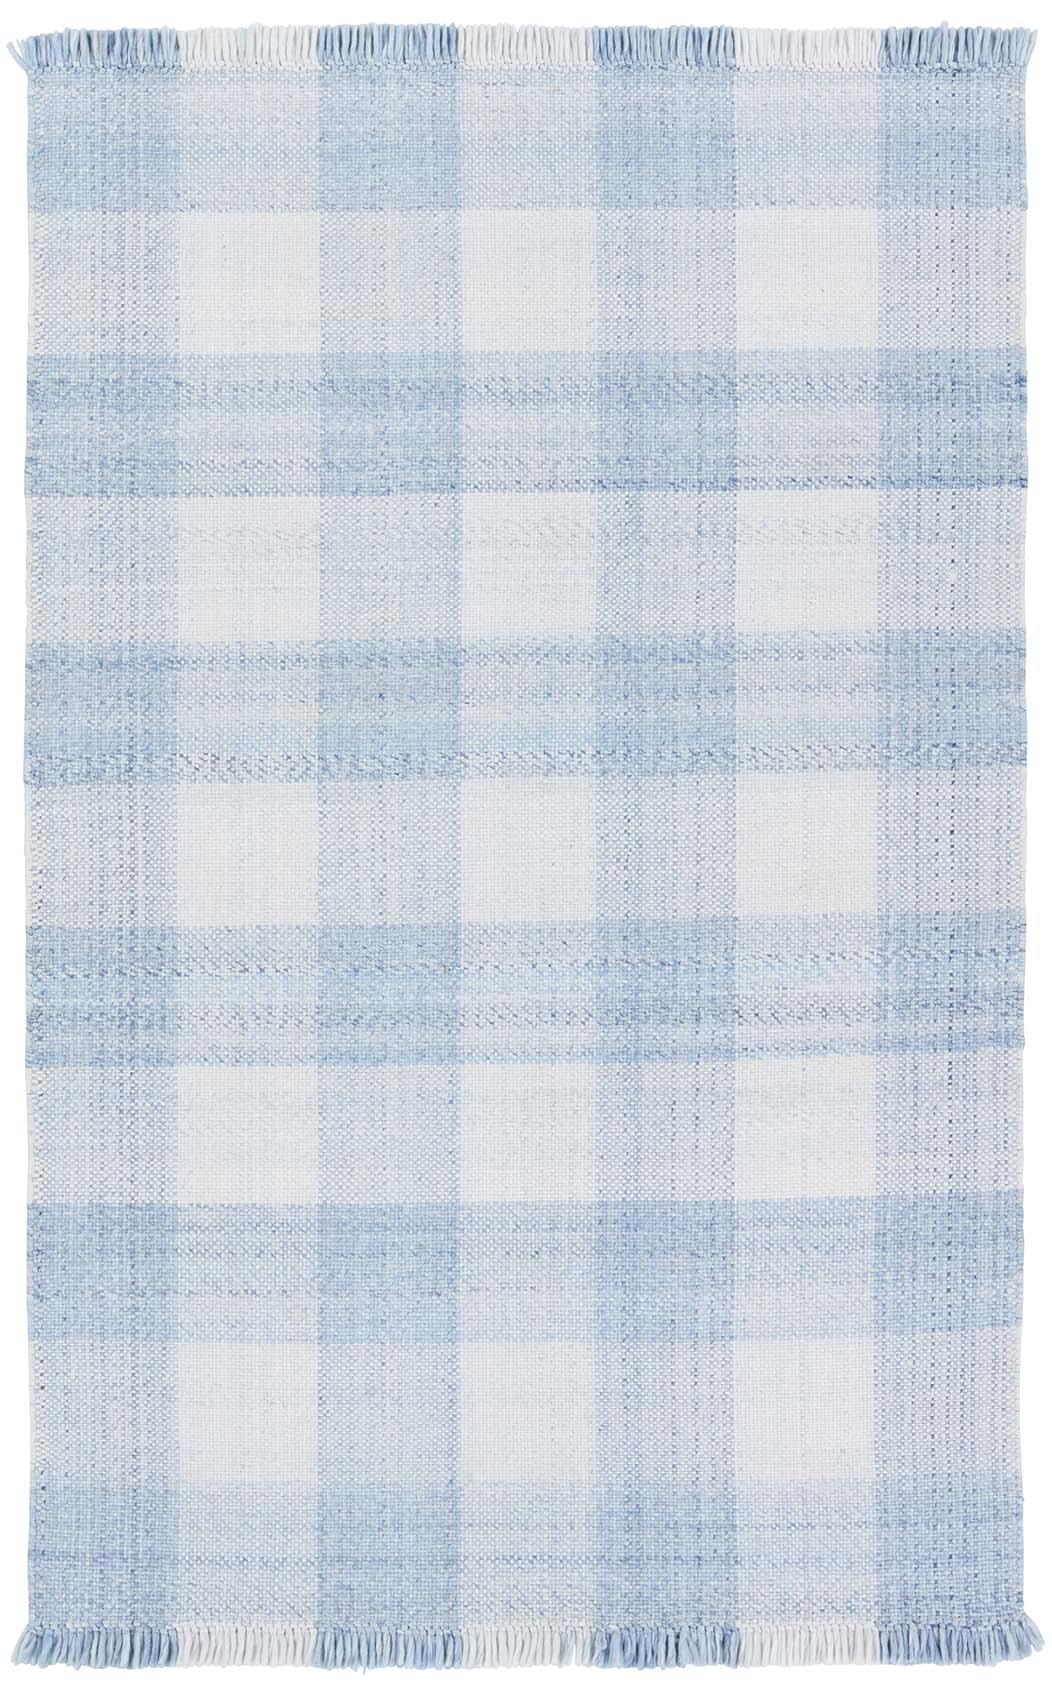 Jaipur Living Truce Handmade Indoor/Outdoor Striped Light Blue/ Ivory Area Rug  Product Image